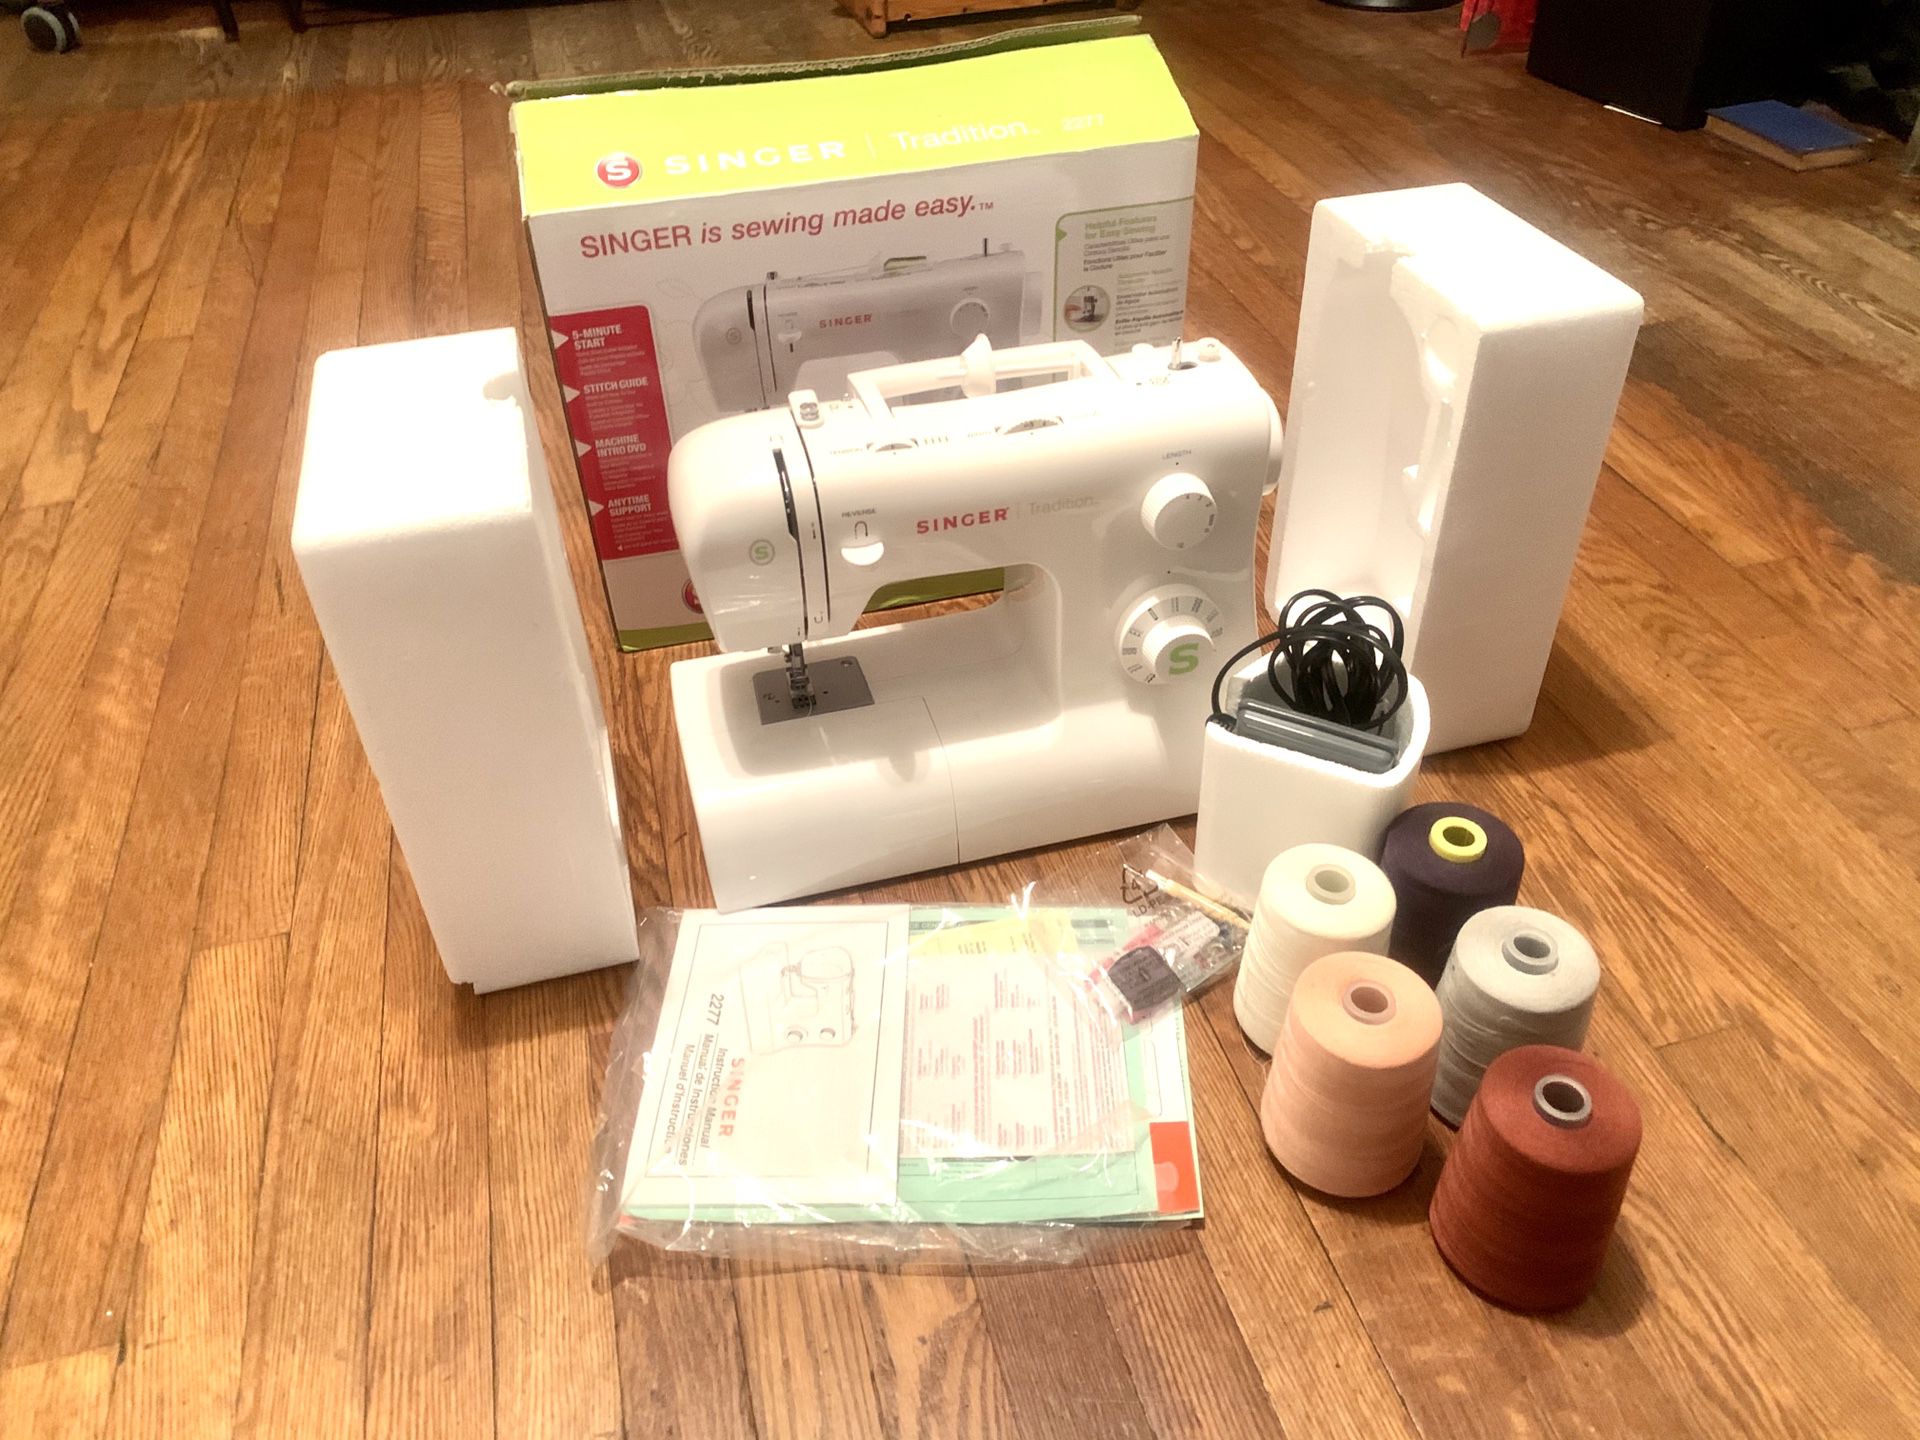 Singer sewing machine with 5 extra large spools of thread.(12000 yards each)